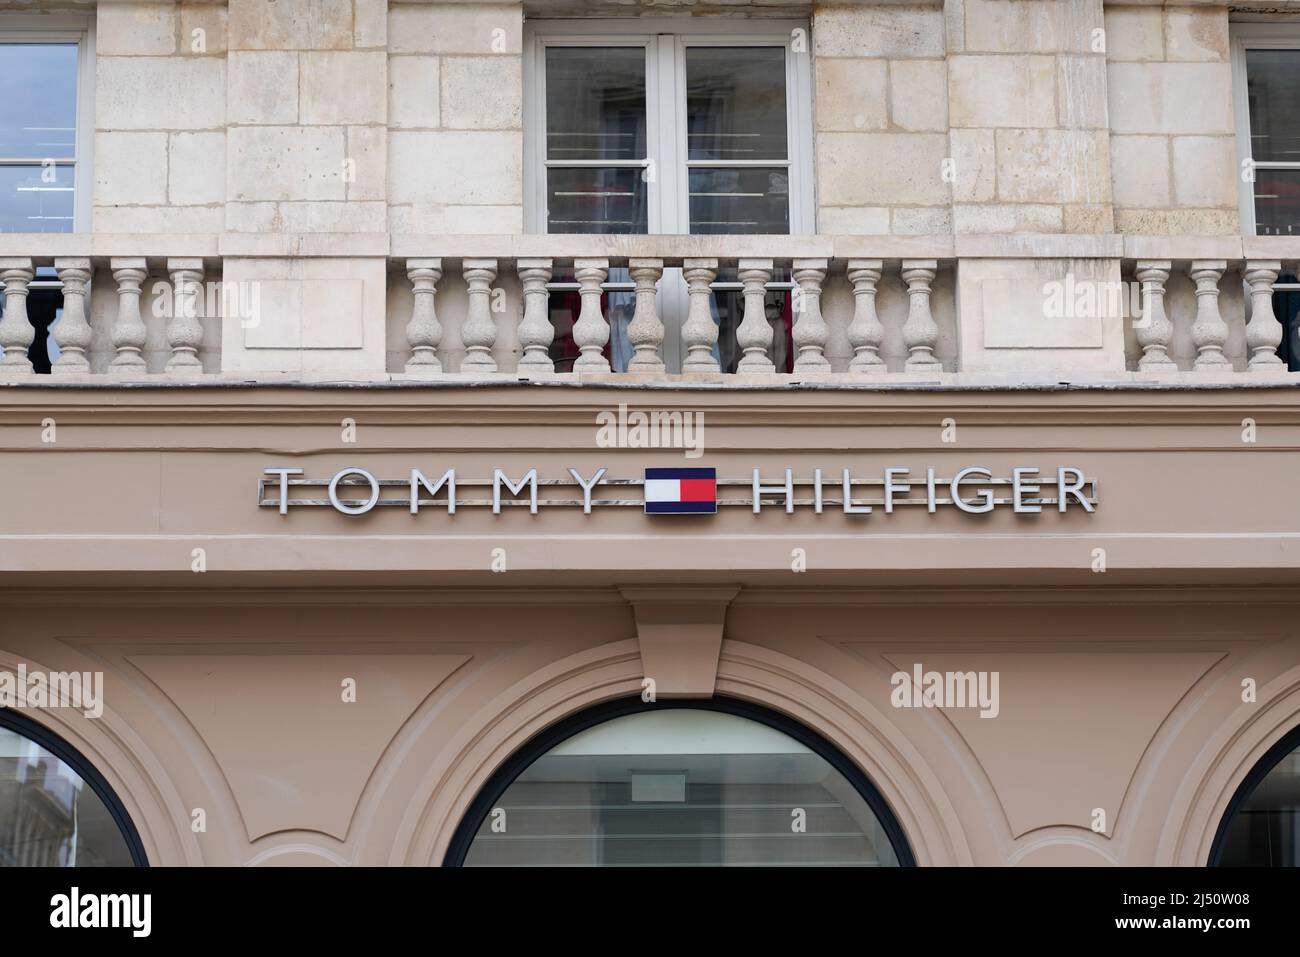 Bordeaux , Aquitaine France - 03 20 2022 : Tommy Hilfiger brand sign and  text logo store facade of American clothing company shop Stock Photo - Alamy